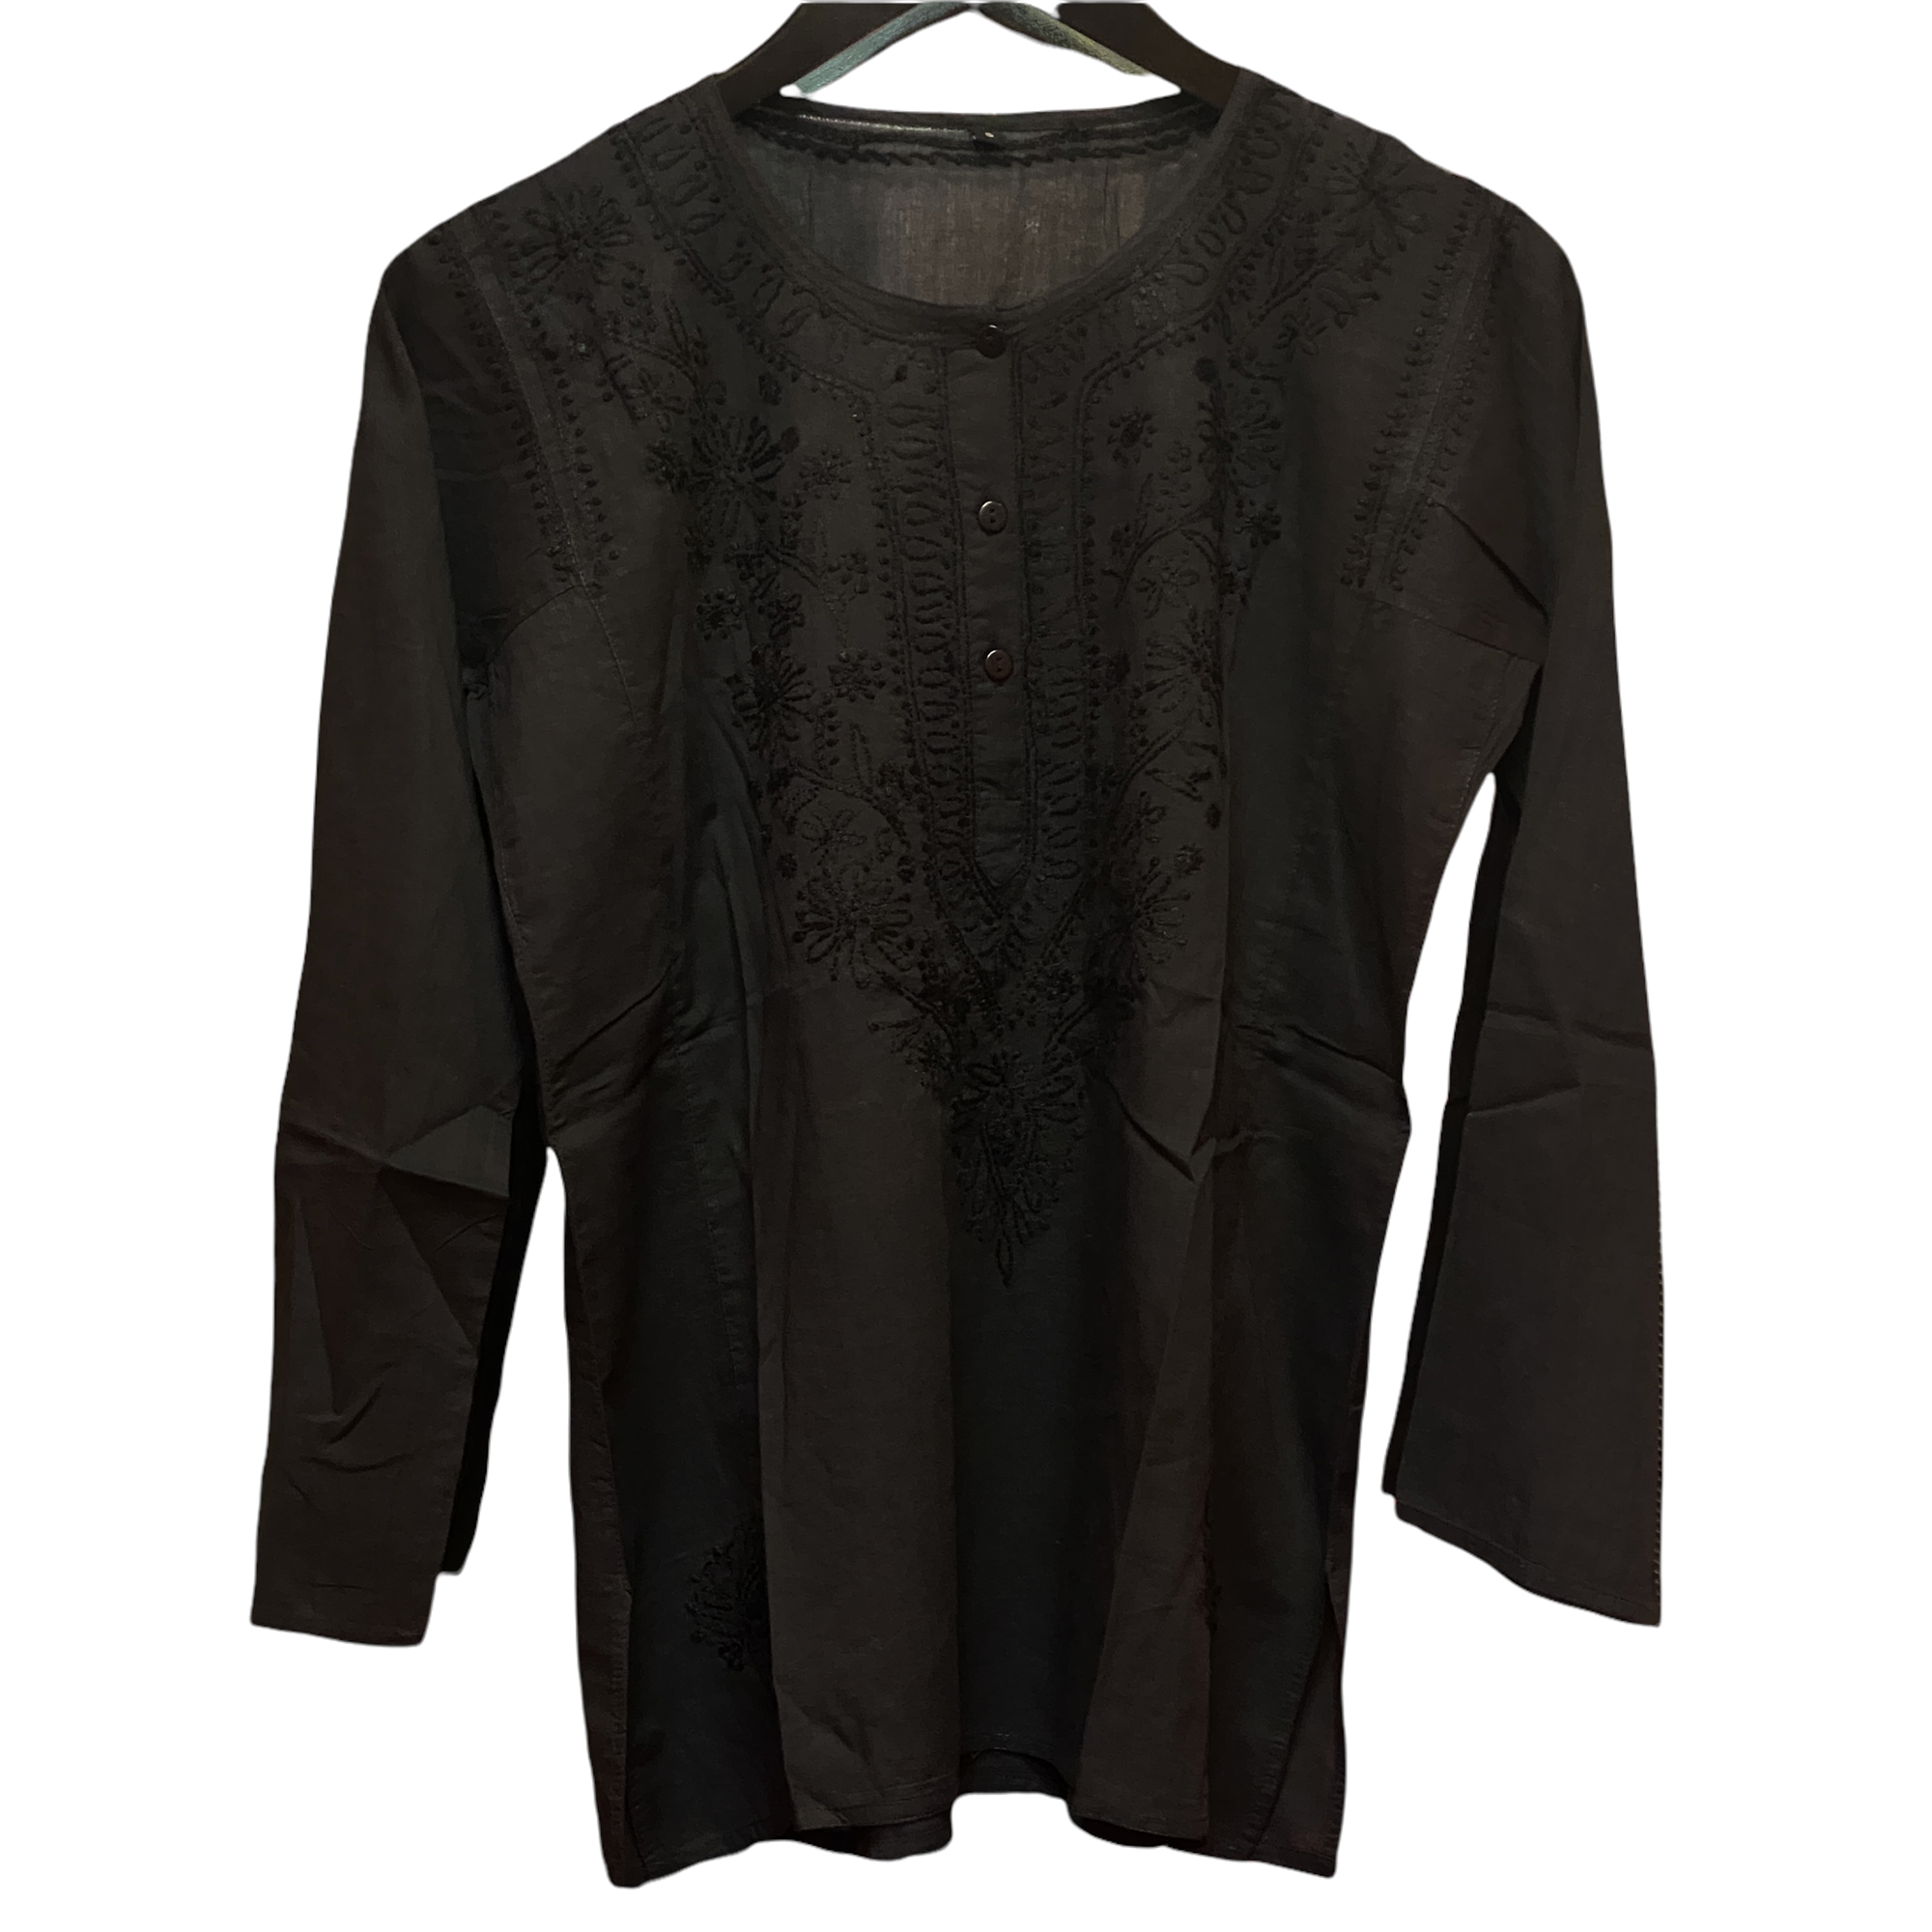 AR Black Organic Cotton Embroidered Top - Vintage India NYC